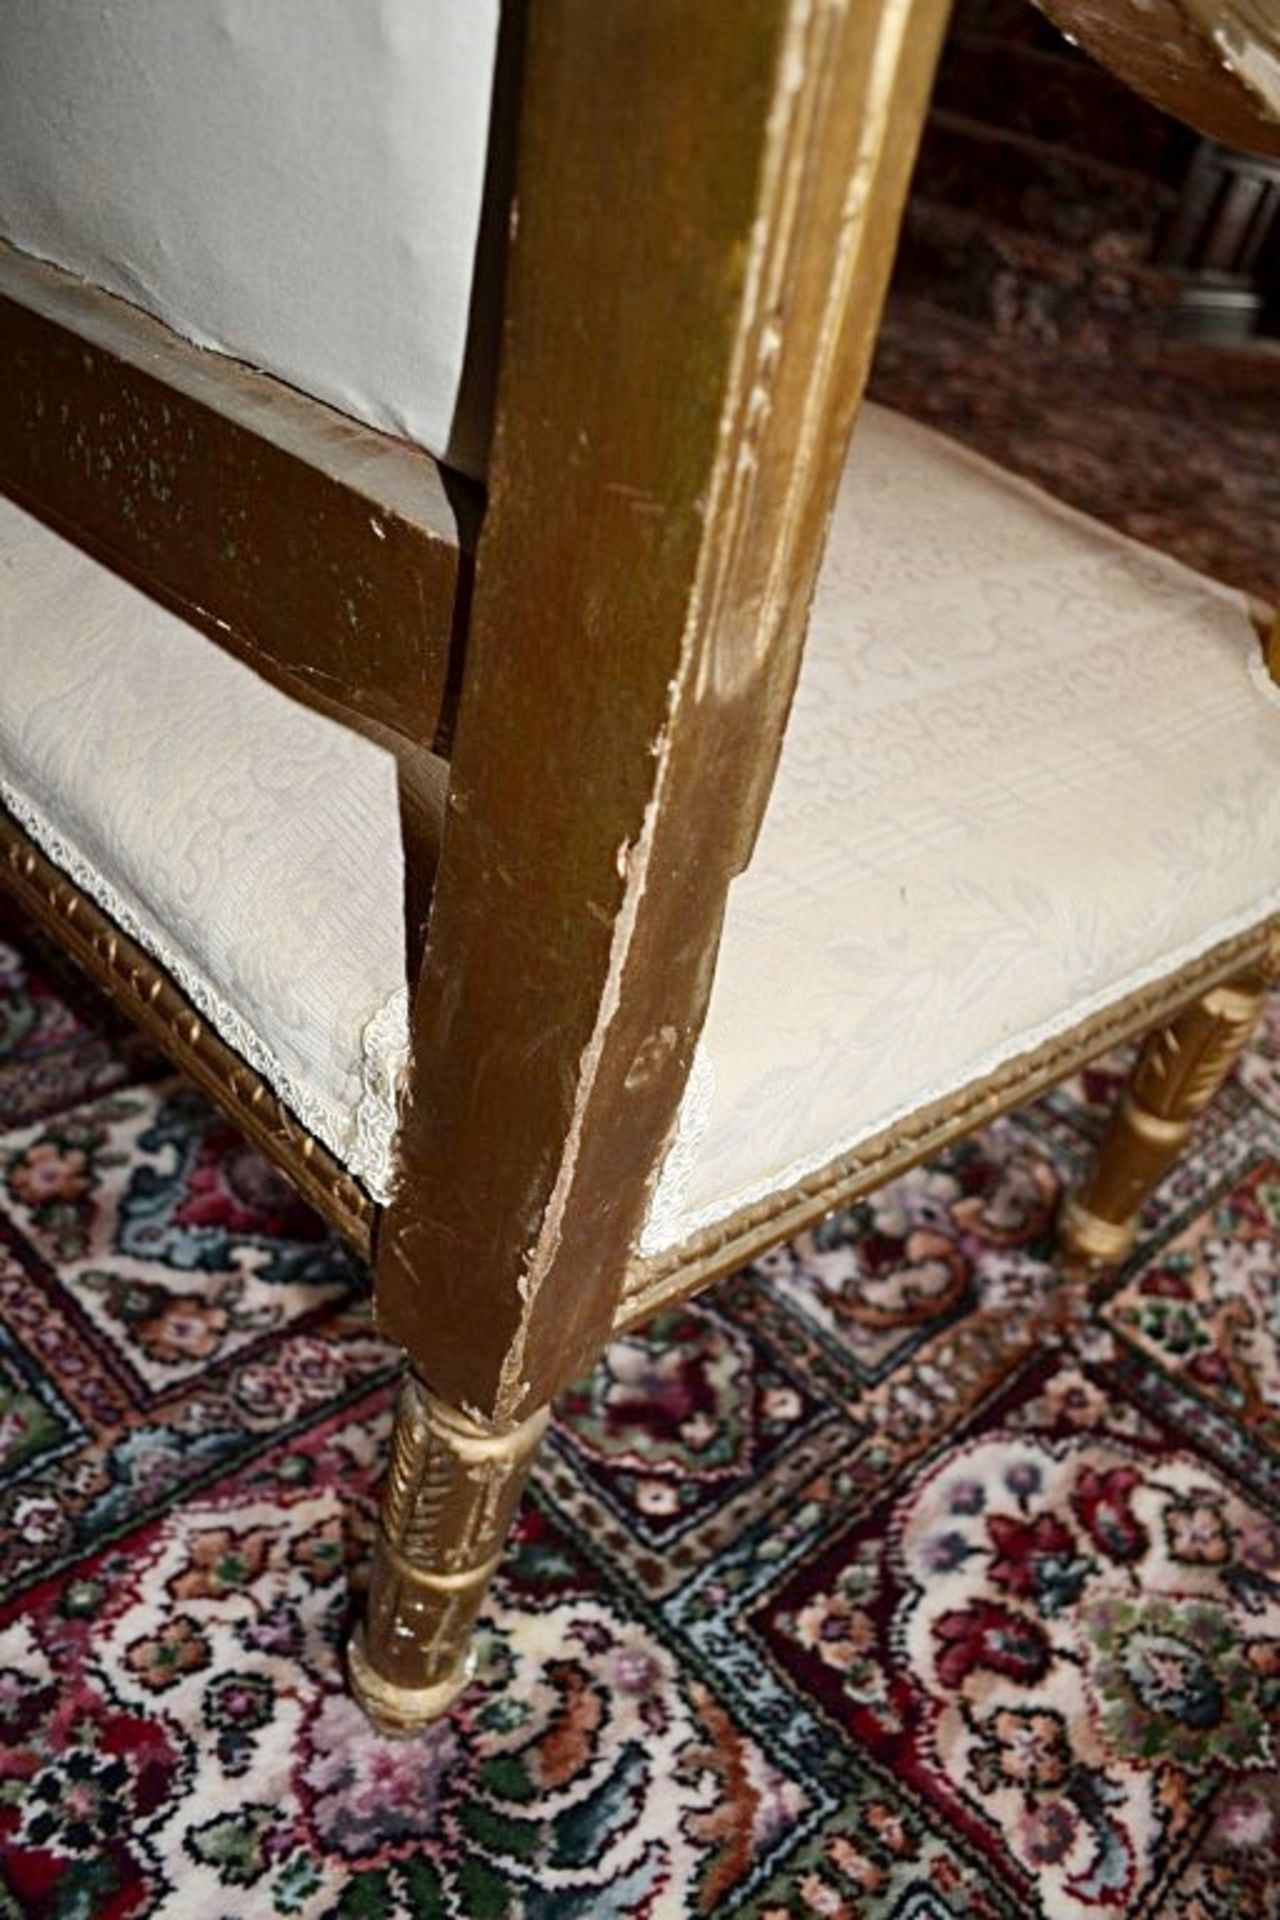 1 x Period Gold Gilt Armchair - Upholstered In A Rich Cream Fabric - From A Grade II Listed Hall - Image 4 of 9